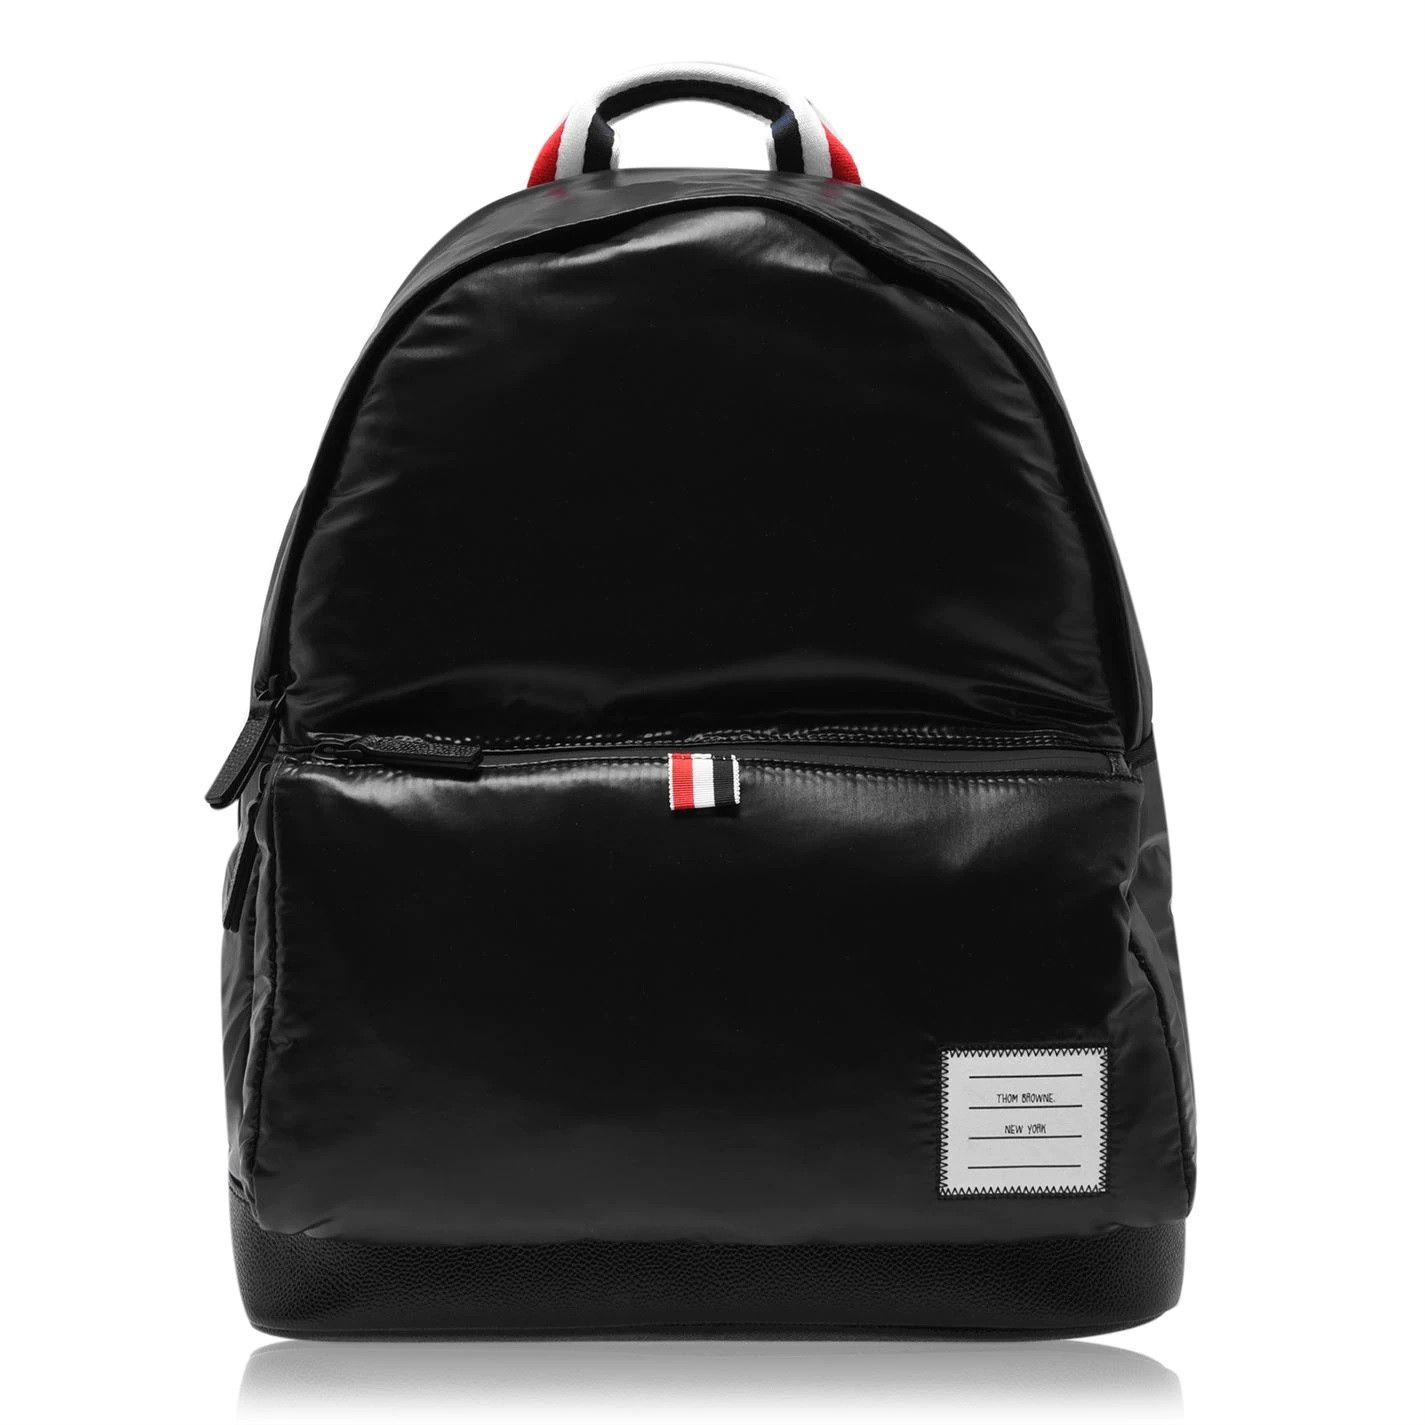 Thom Browne Thom Browne Oversized Ripstop Backpack | Grailed